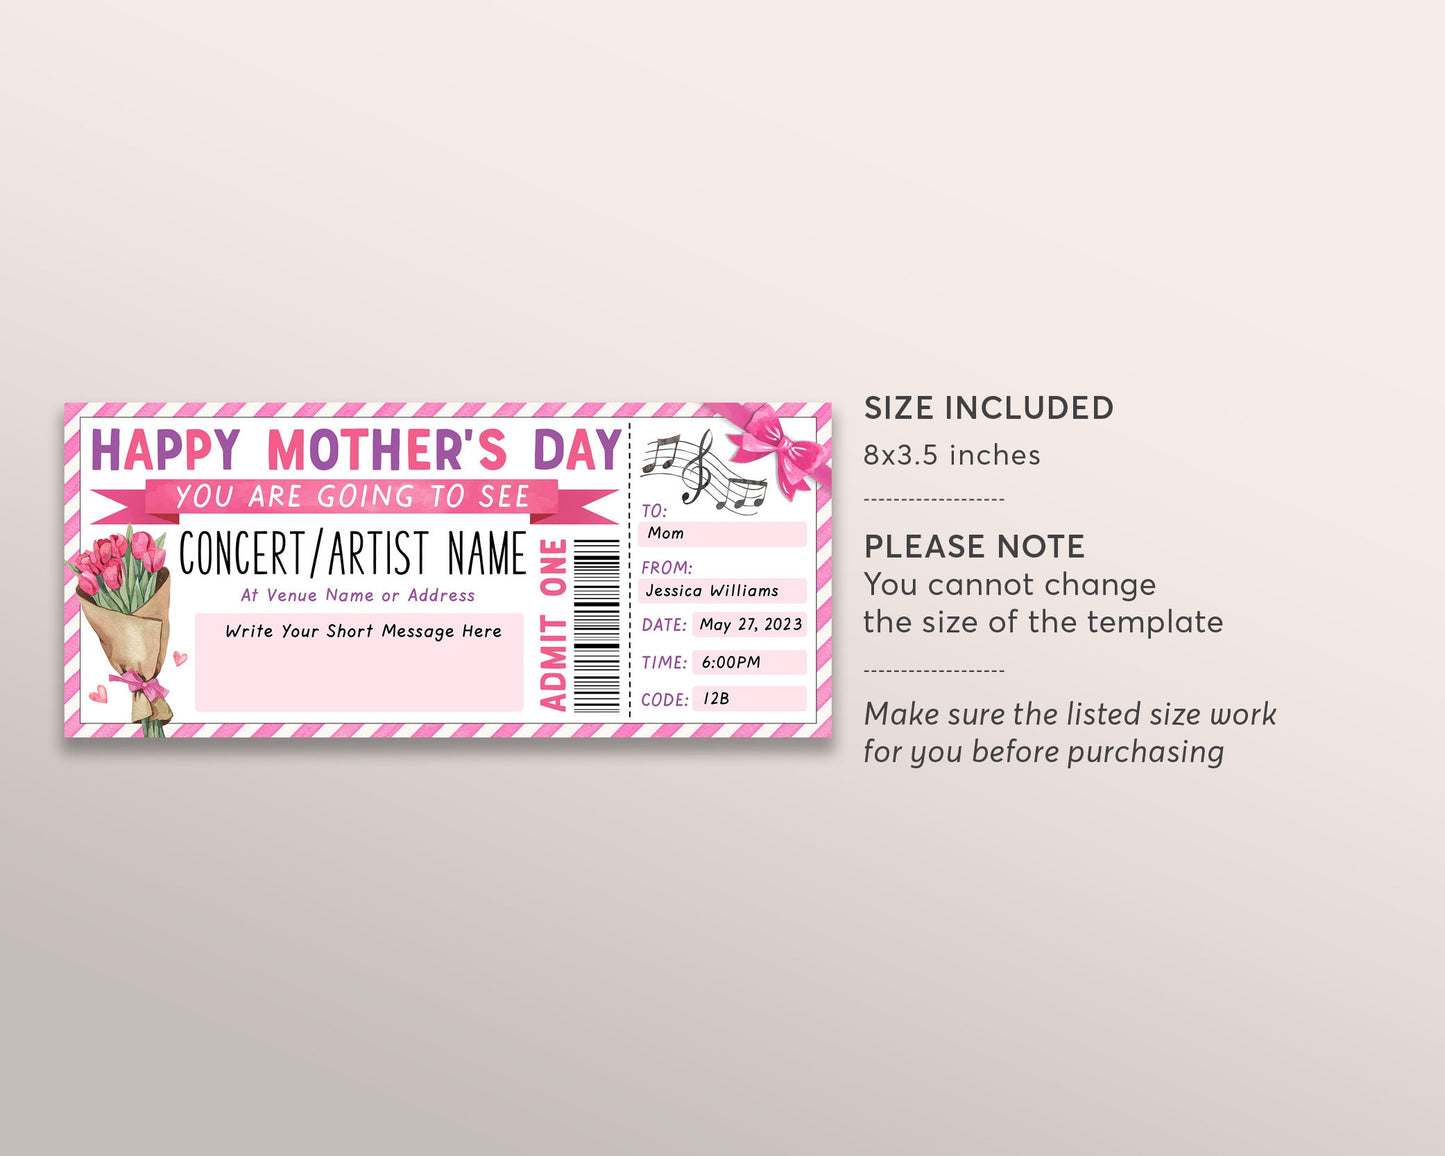 Mothers Day Concert Ticket Gift Voucher Editable Template, Surprise Concert Gift Certificate for Mom, Music Show Artist Experience Reveal